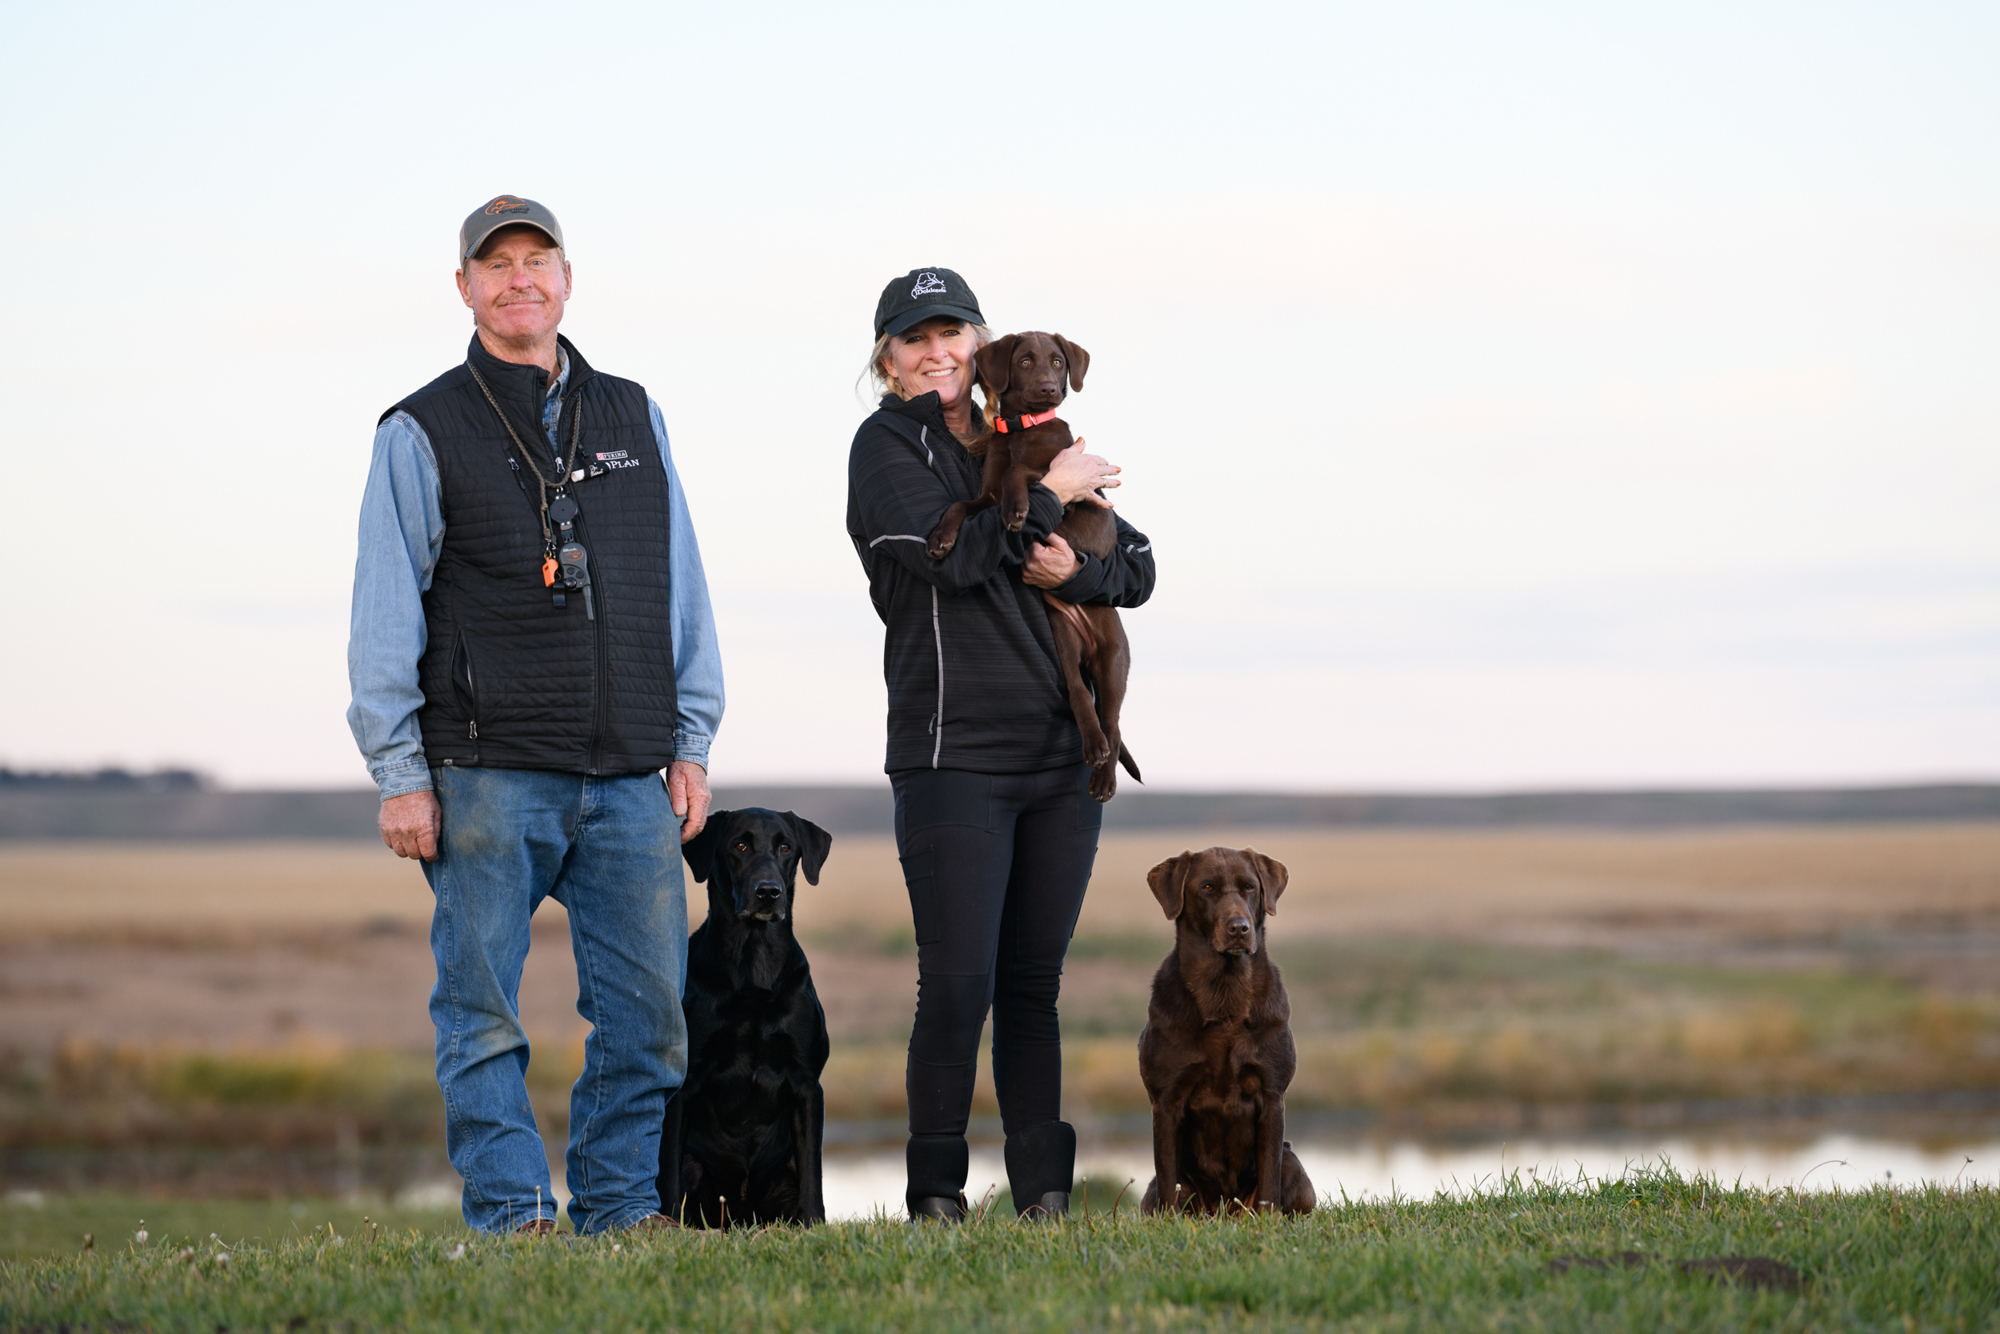 Tom and Tina Dokken at home in South Dakota with their dogs.